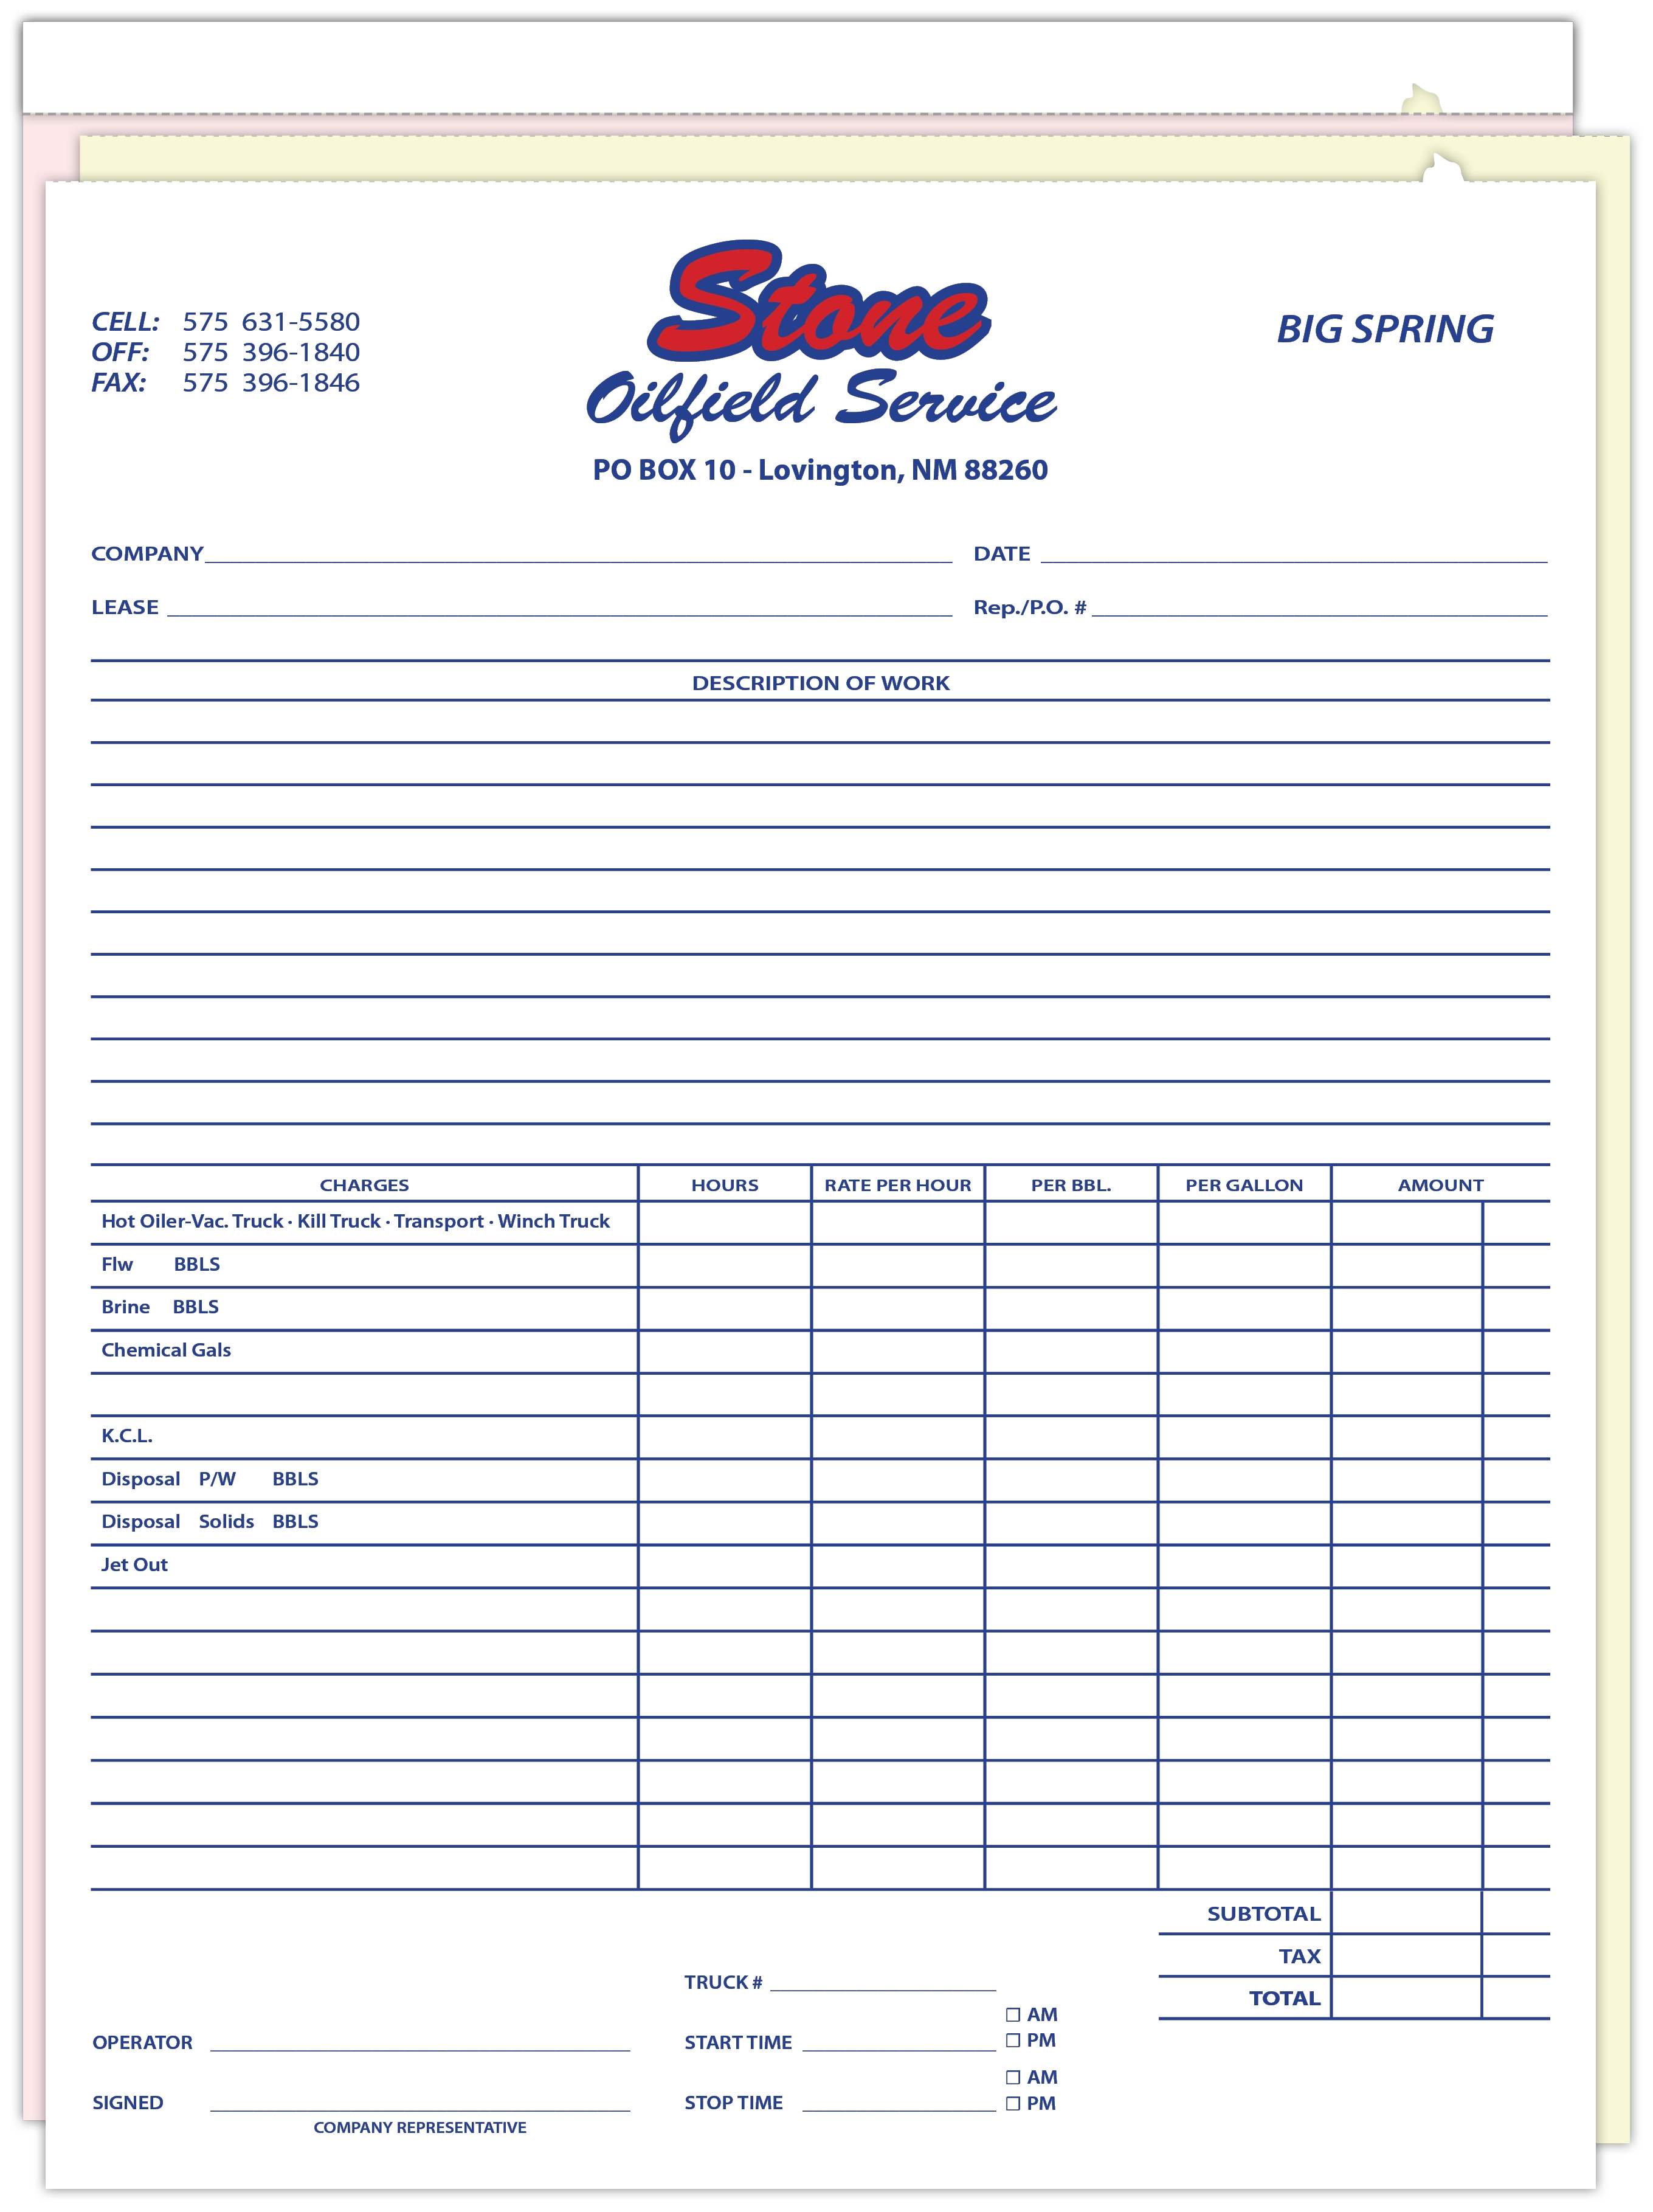 Best Small Business Invoice Software * Invoice Template Ideas